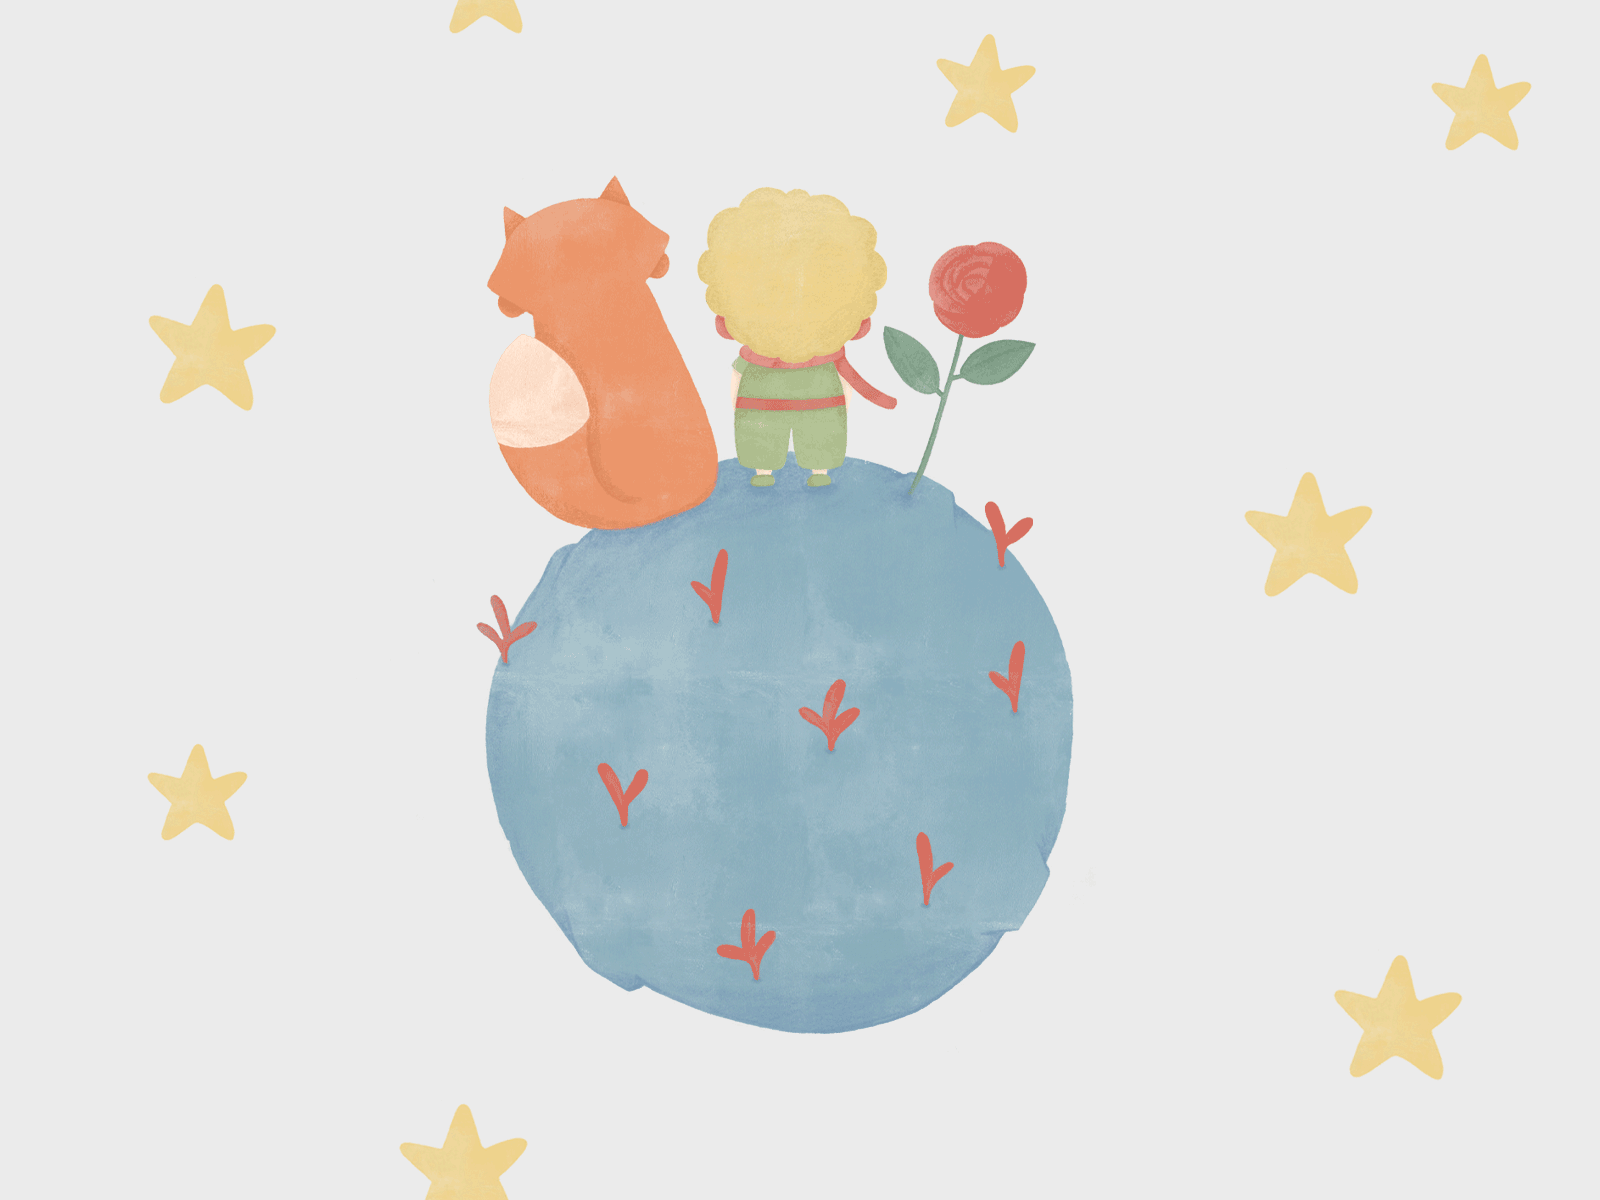 the-little-prince-by-radhika-gentilal-on-dribbble